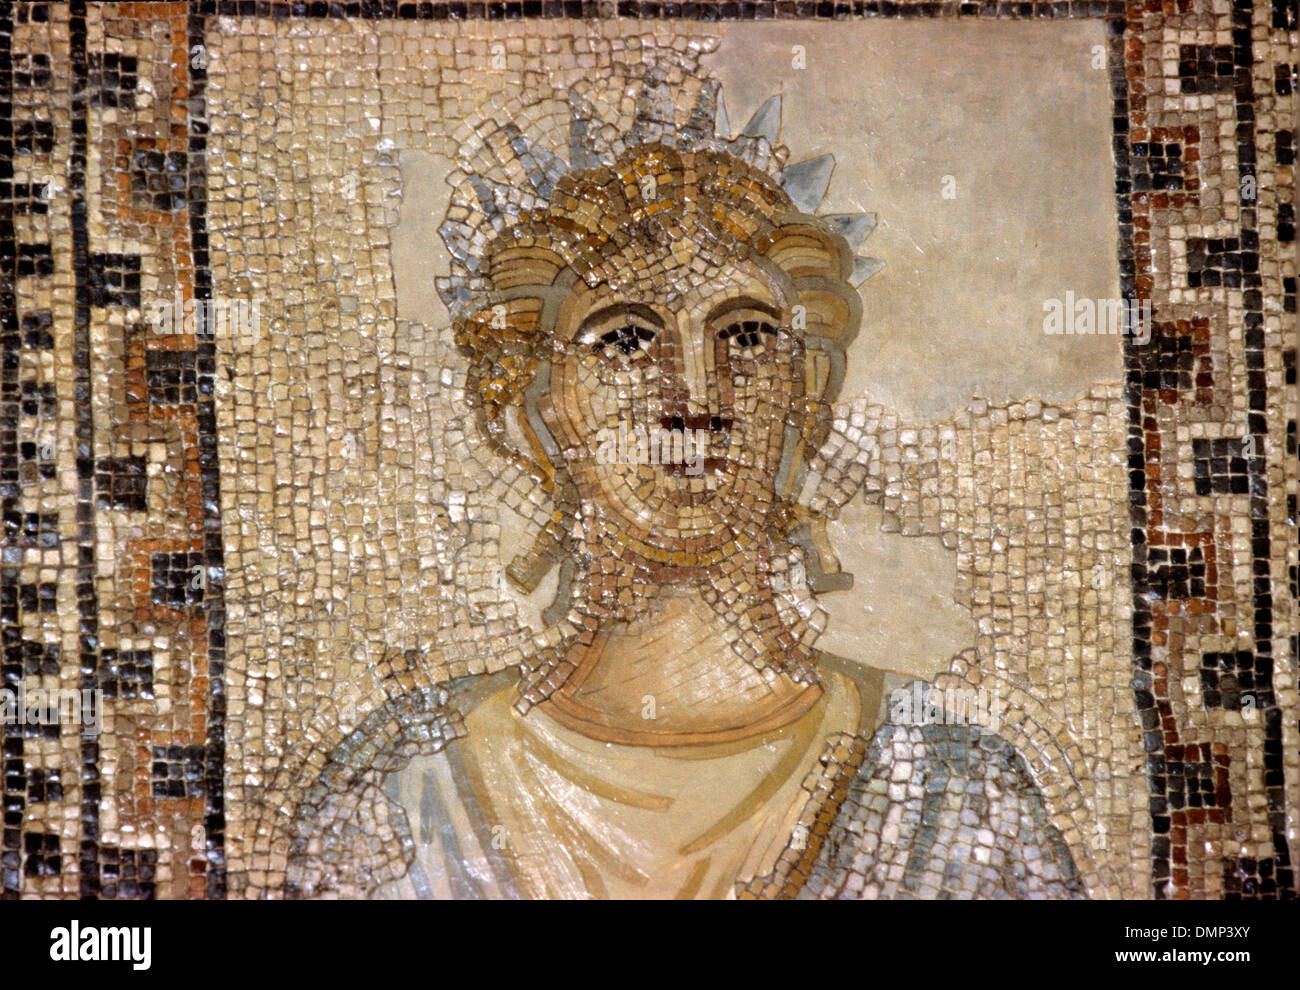 Romano-German period. Mosaic. Calliope or Kalliope, muse of epic poetry and eloquence. Stock Photo